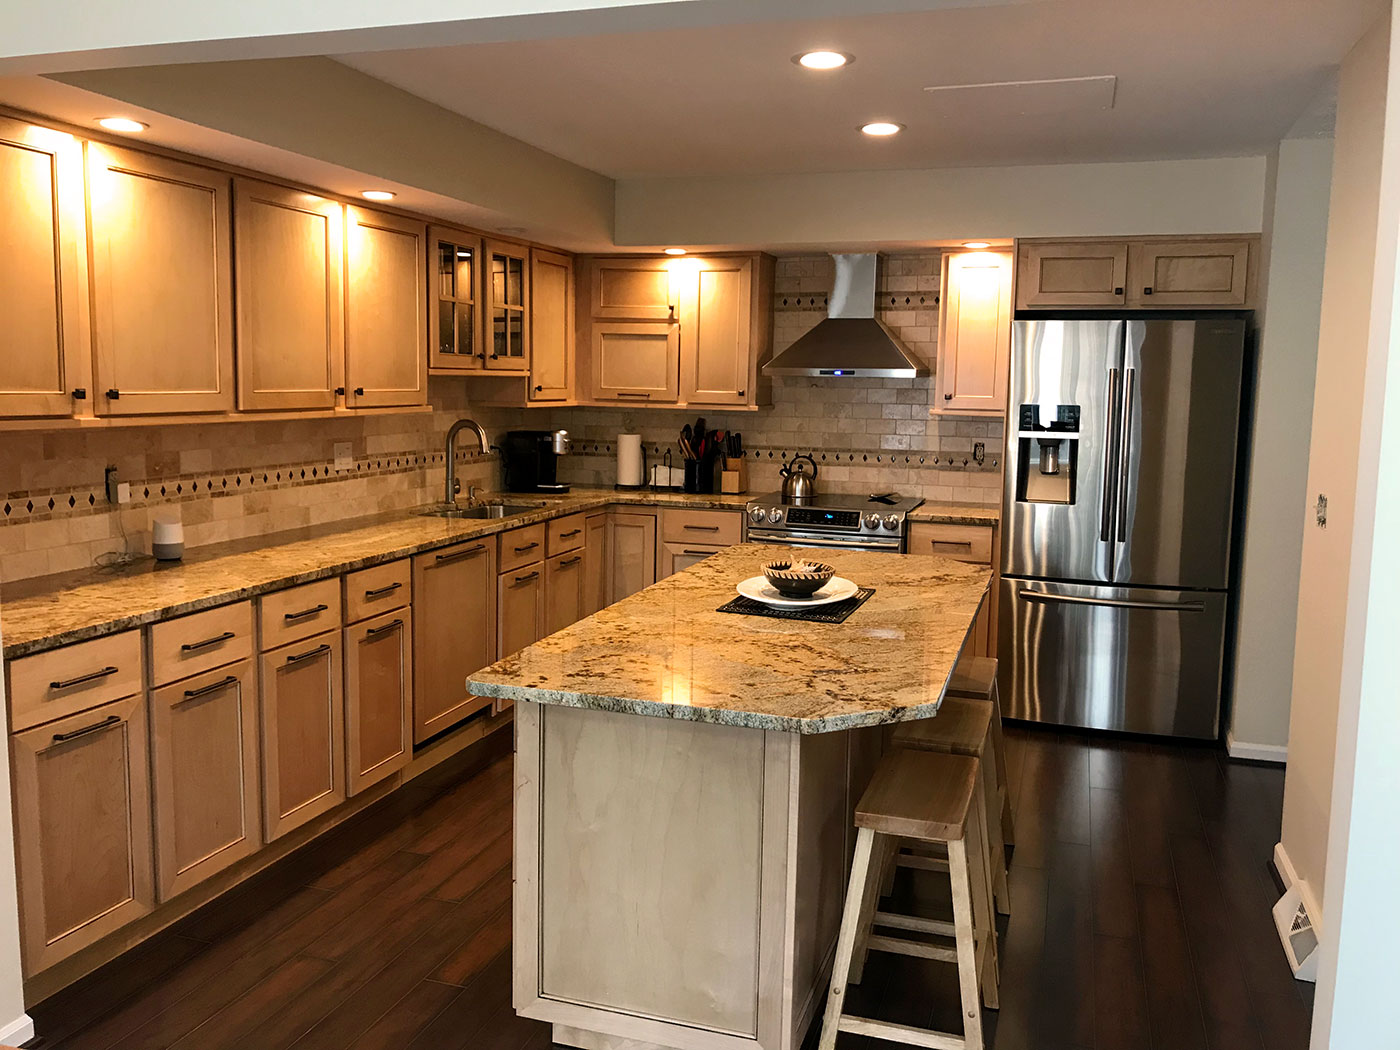 Standard / Hybrid Kitchen Cabinets - Craftworks Custom Cabinetry - Rochester, NY